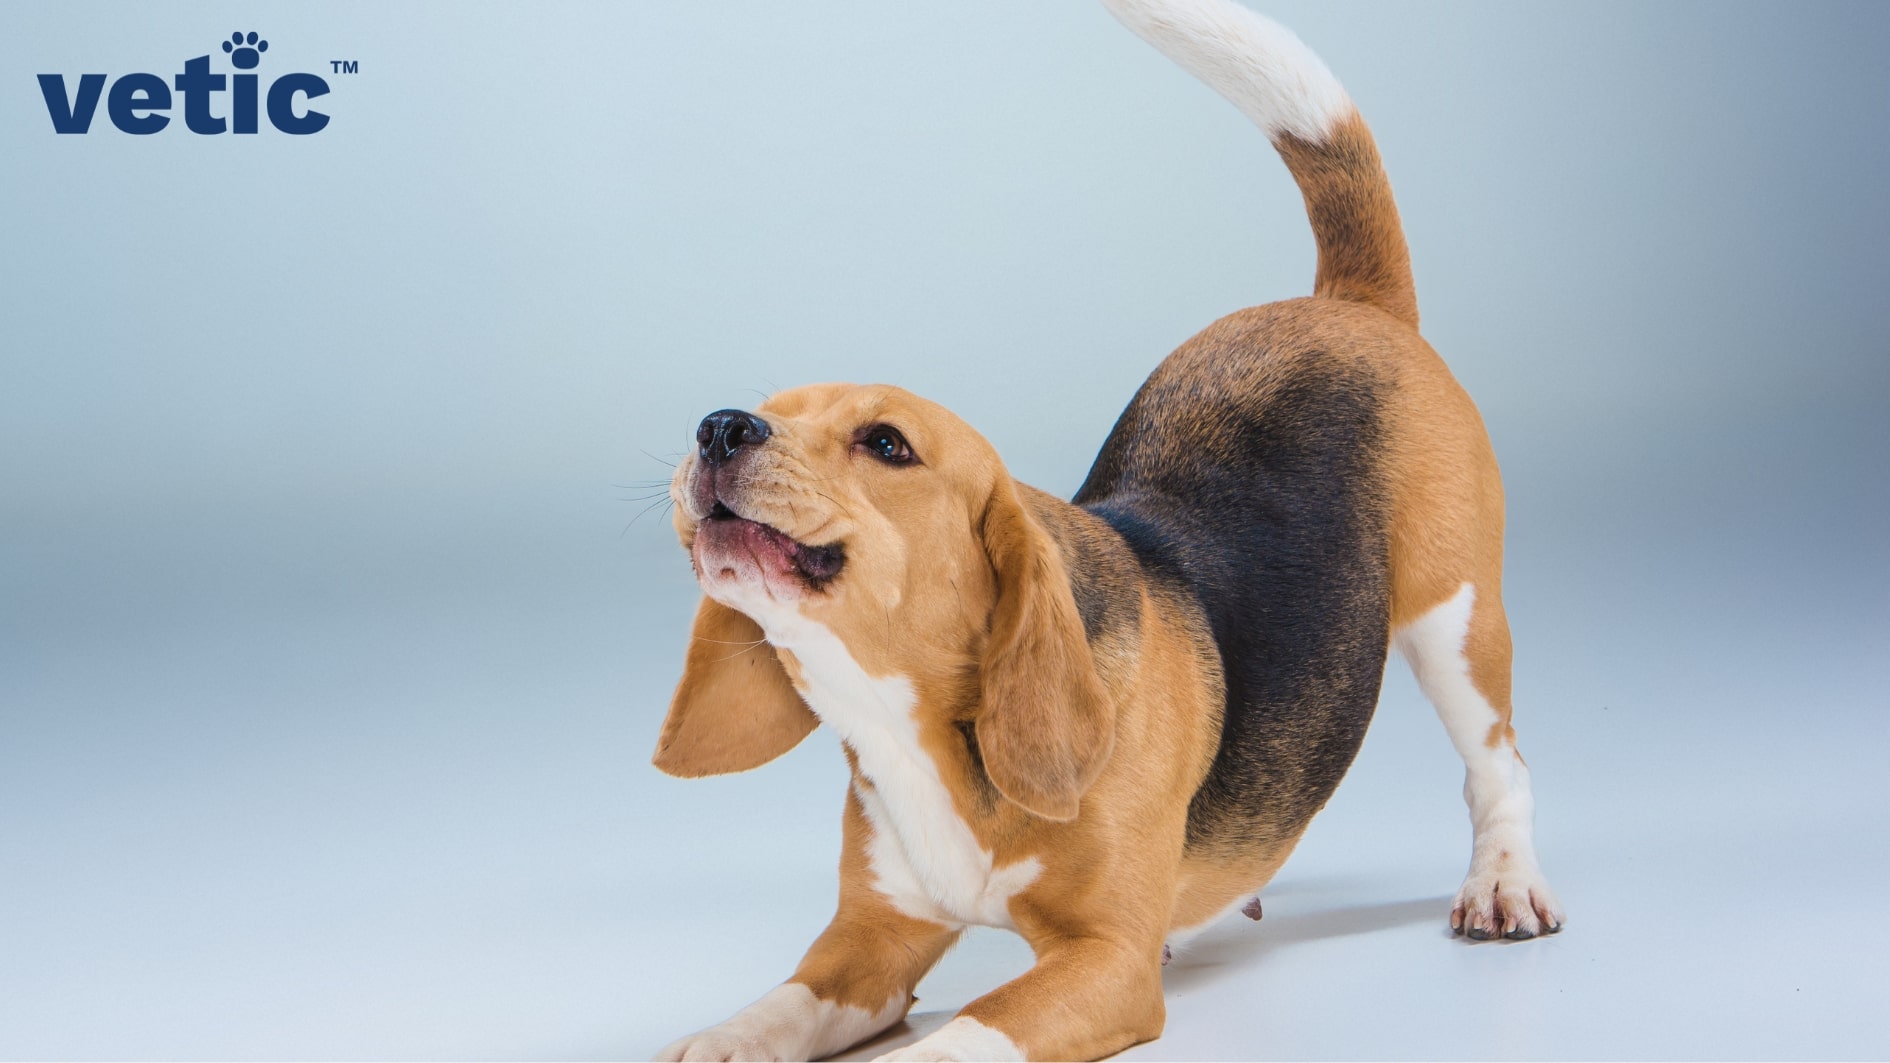 A beagle puppy doing a play bow. Socializing pups while you are exercising your puppies can help them learn these easy canine body languages and prevent unwarranted aggression.